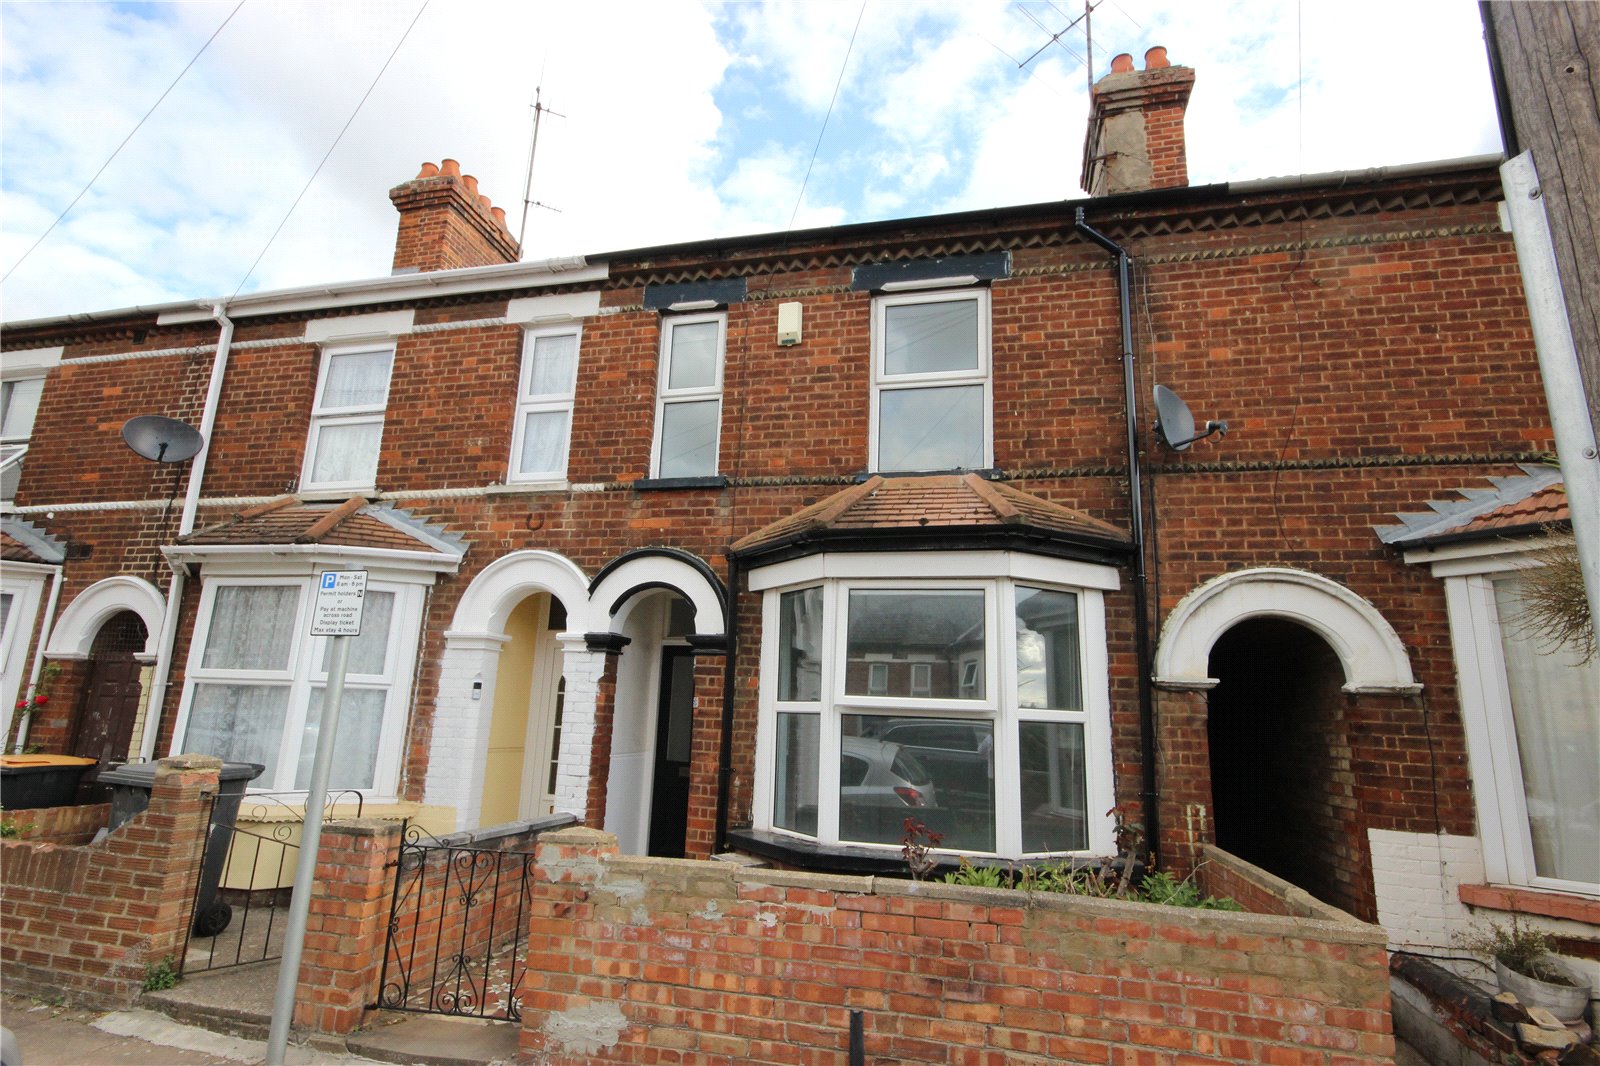 3 bed house to rent in Sandhurst Road, Bedford - Property Image 1